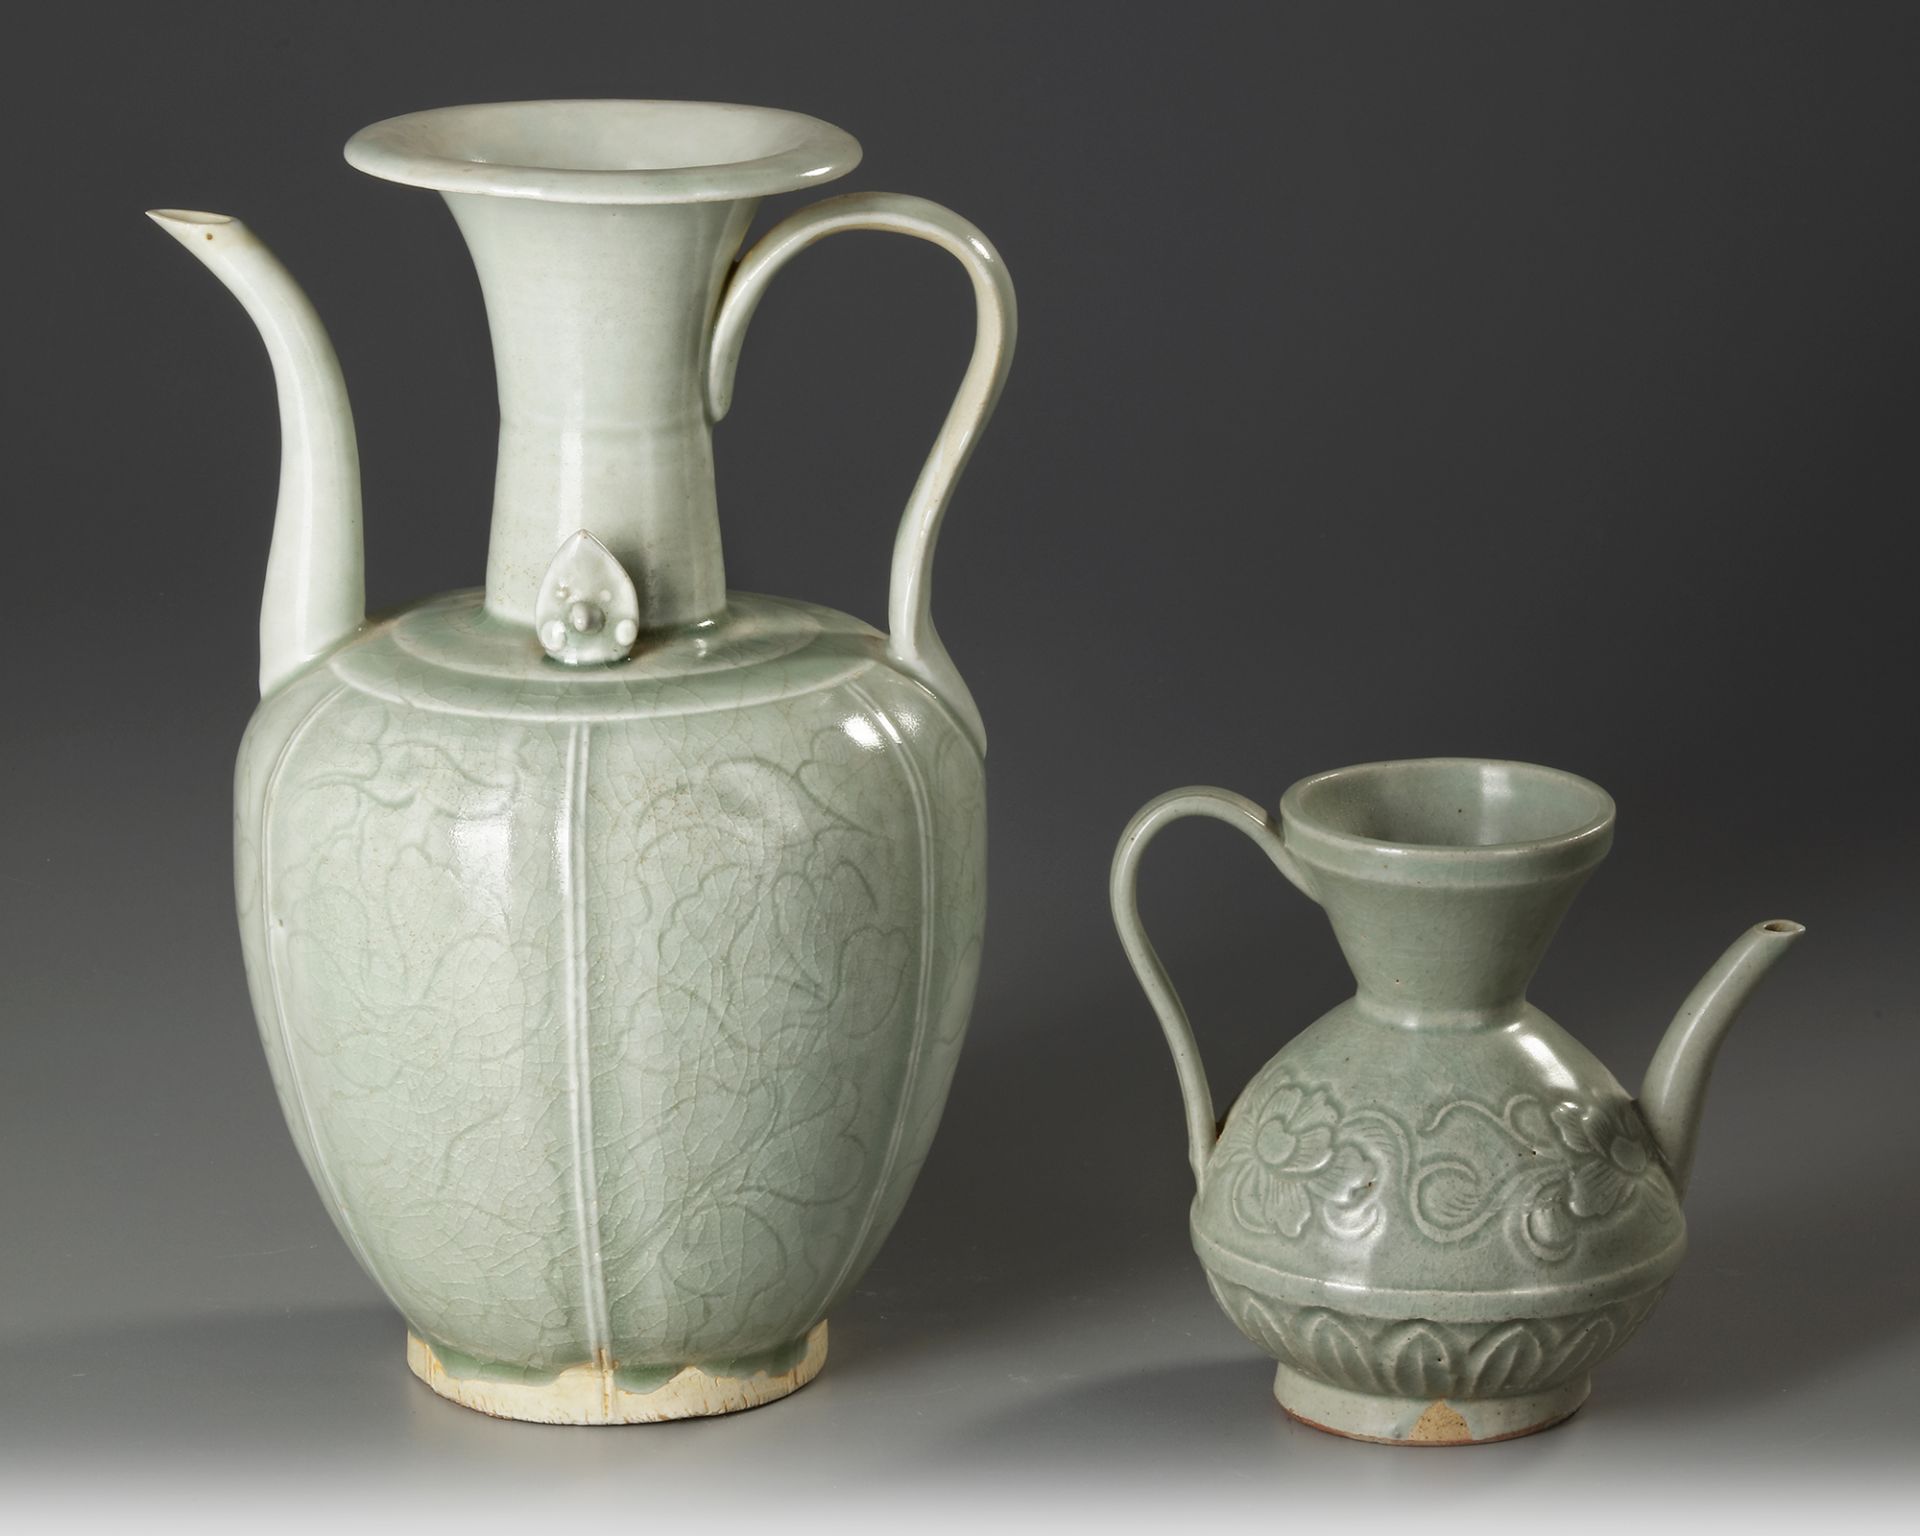 TWO CHINESE CELADON EWERS, SONG DYNASTY (960-1279 AD)/ MING DYNASTY (1368-1644)